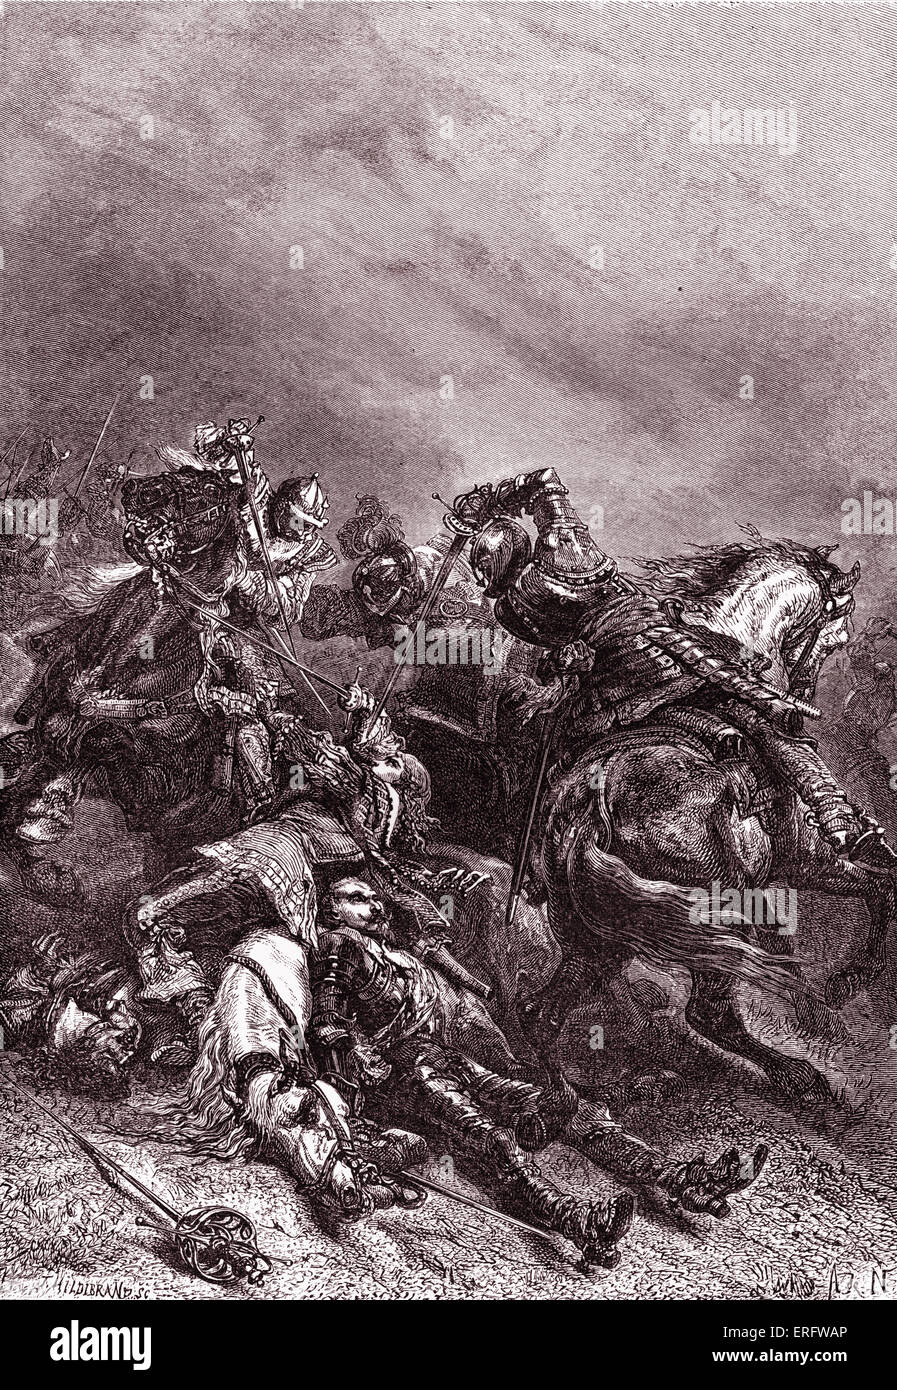 Death of Gustavus Adolphus of Sweden/ King Gustav II Adolf (1594 – 1632). The king led the Swedish army during the Thirty Years War. Gustavus Adolphus was killed at the Battle of Lützen. Stock Photo